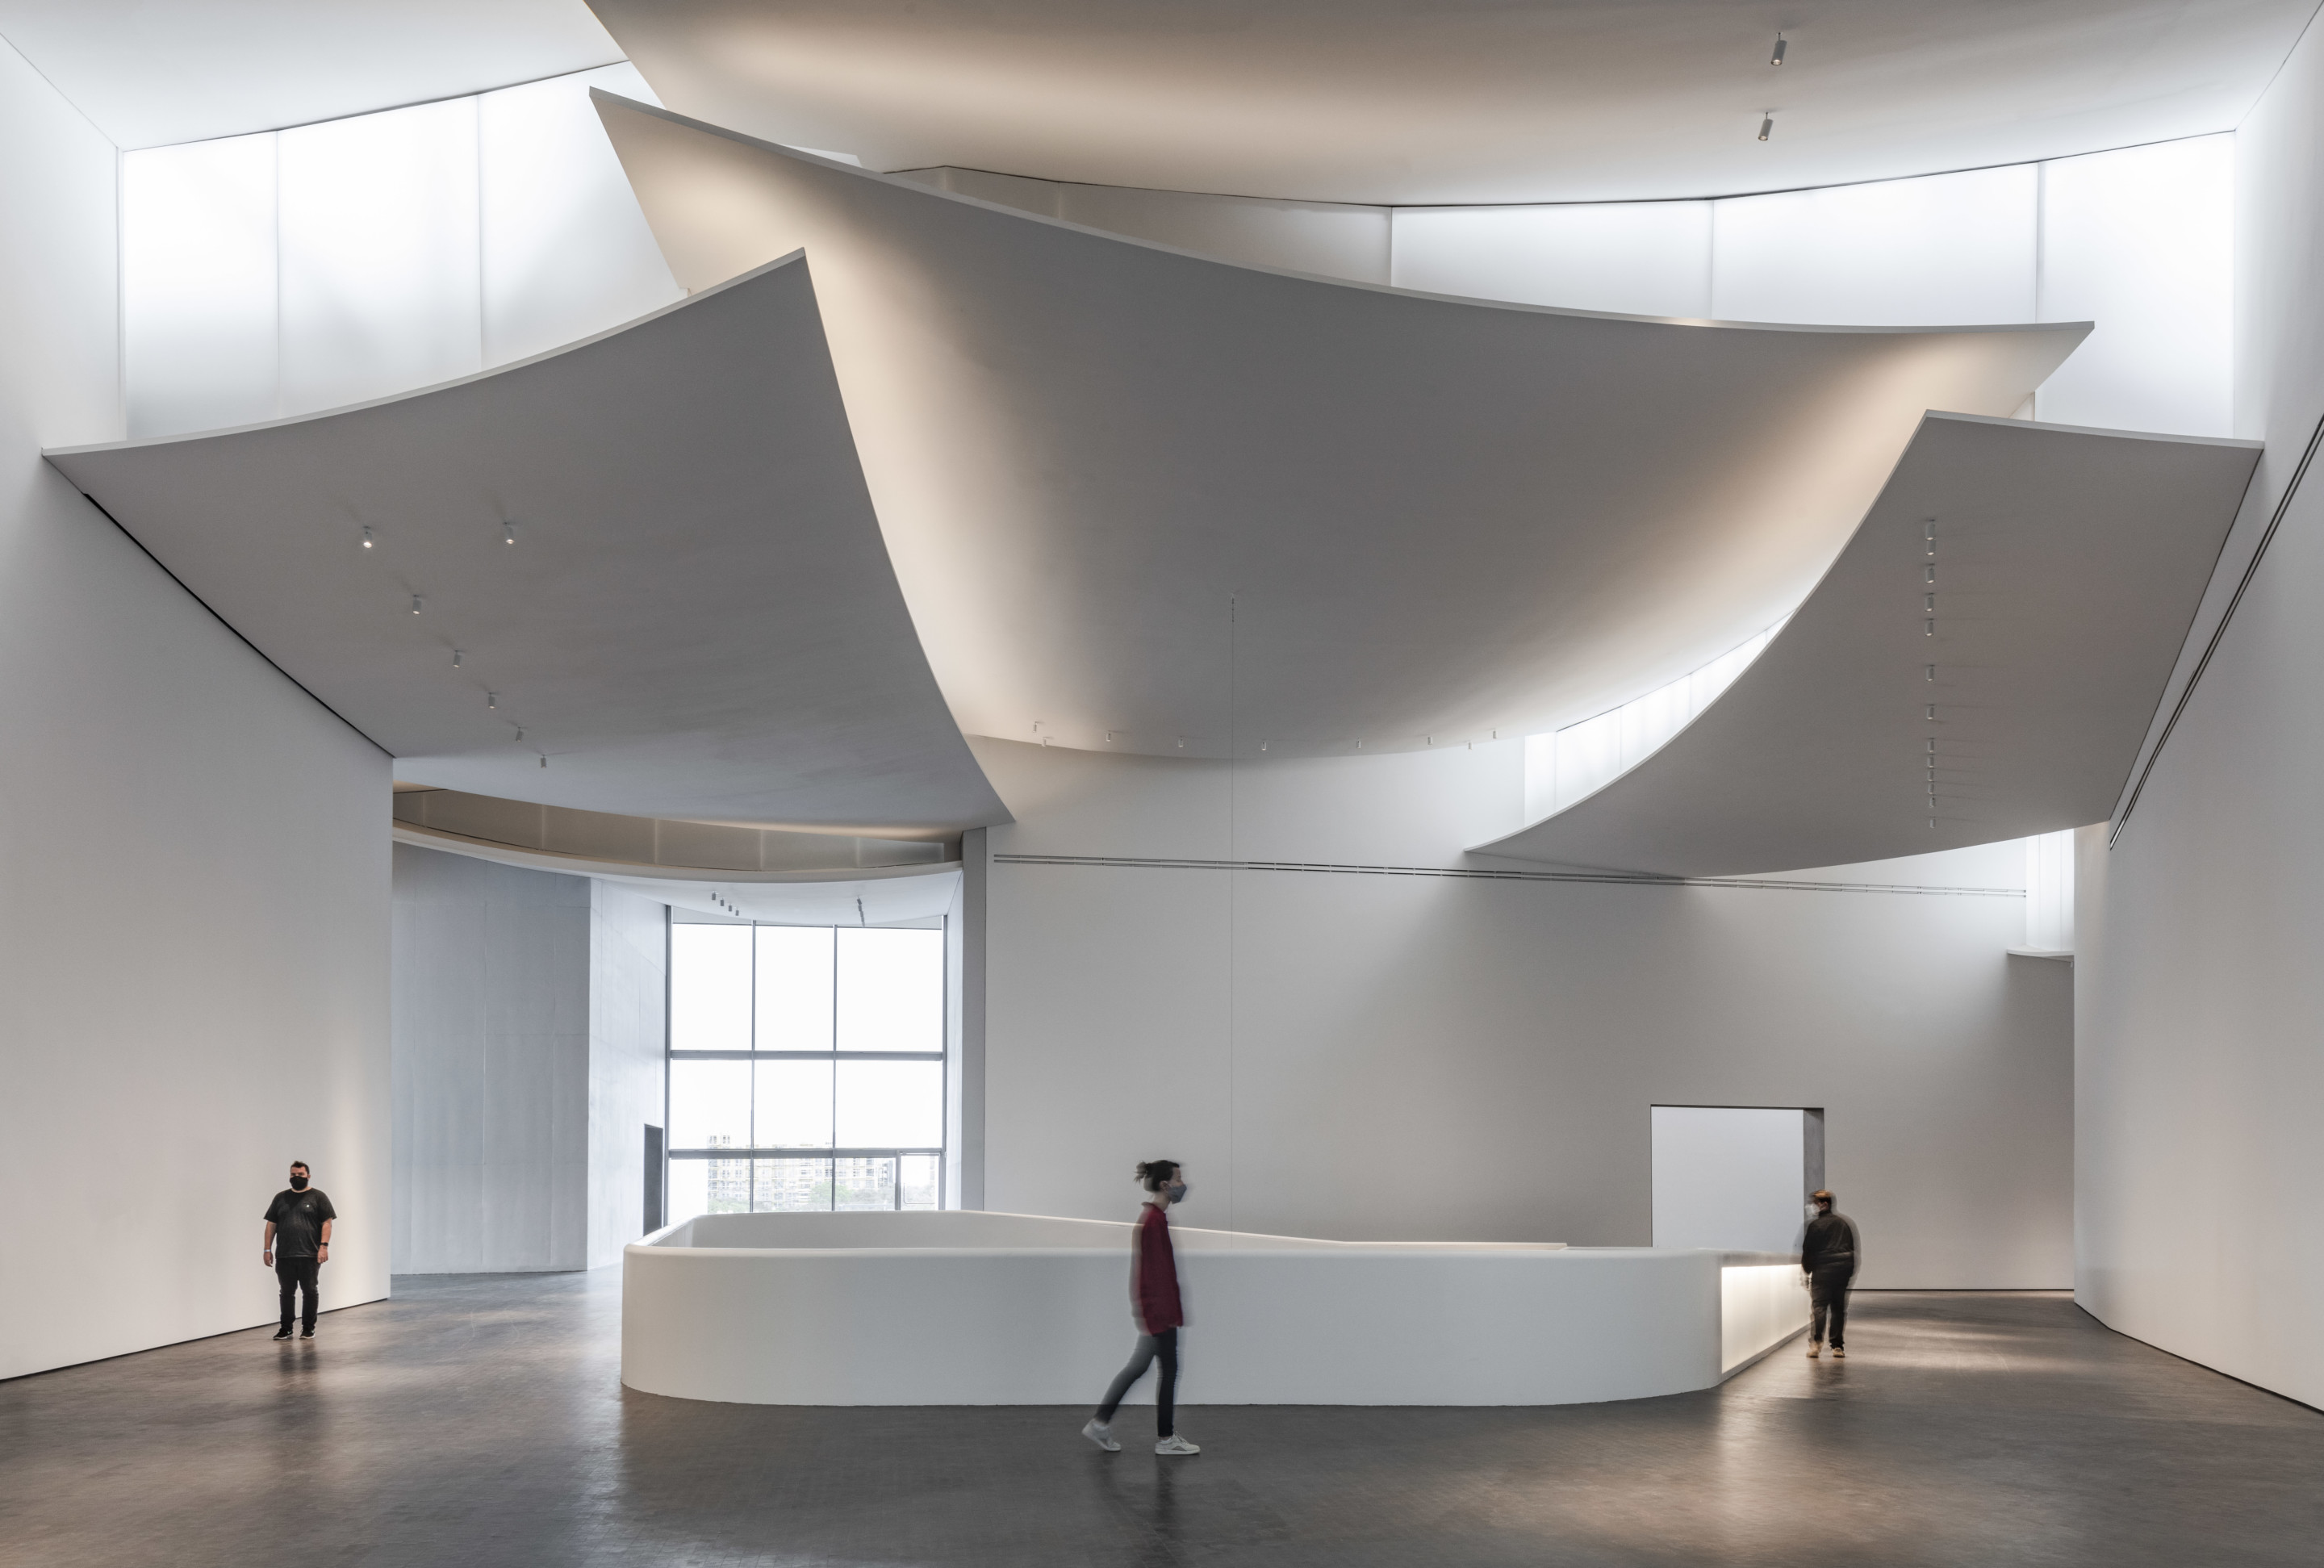 The interior of the Kinder Building at MFAH